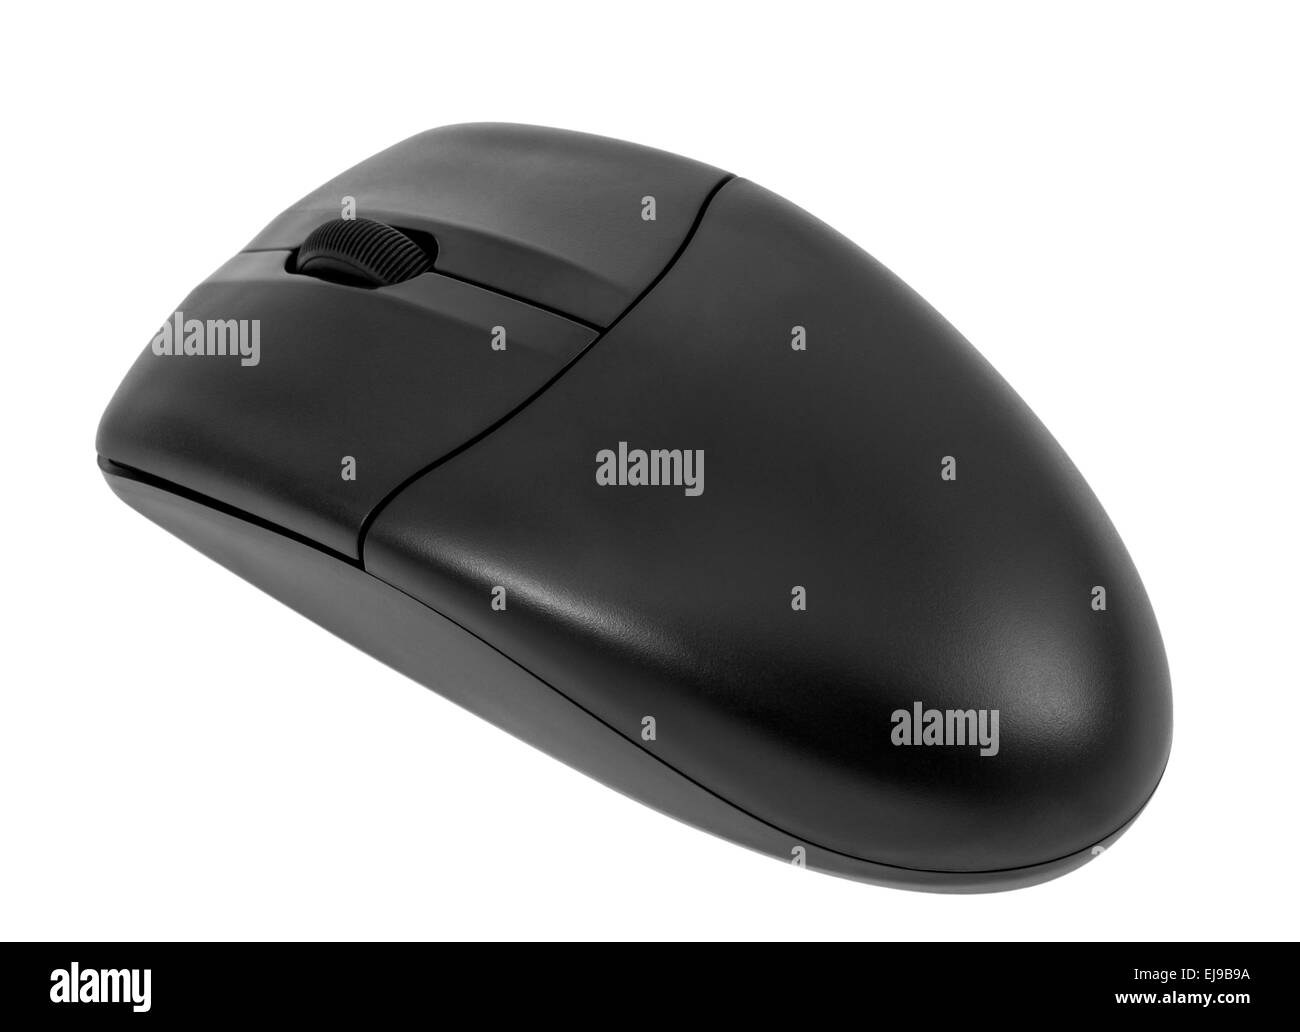 Wireless optical black computer mouse Stock Photo